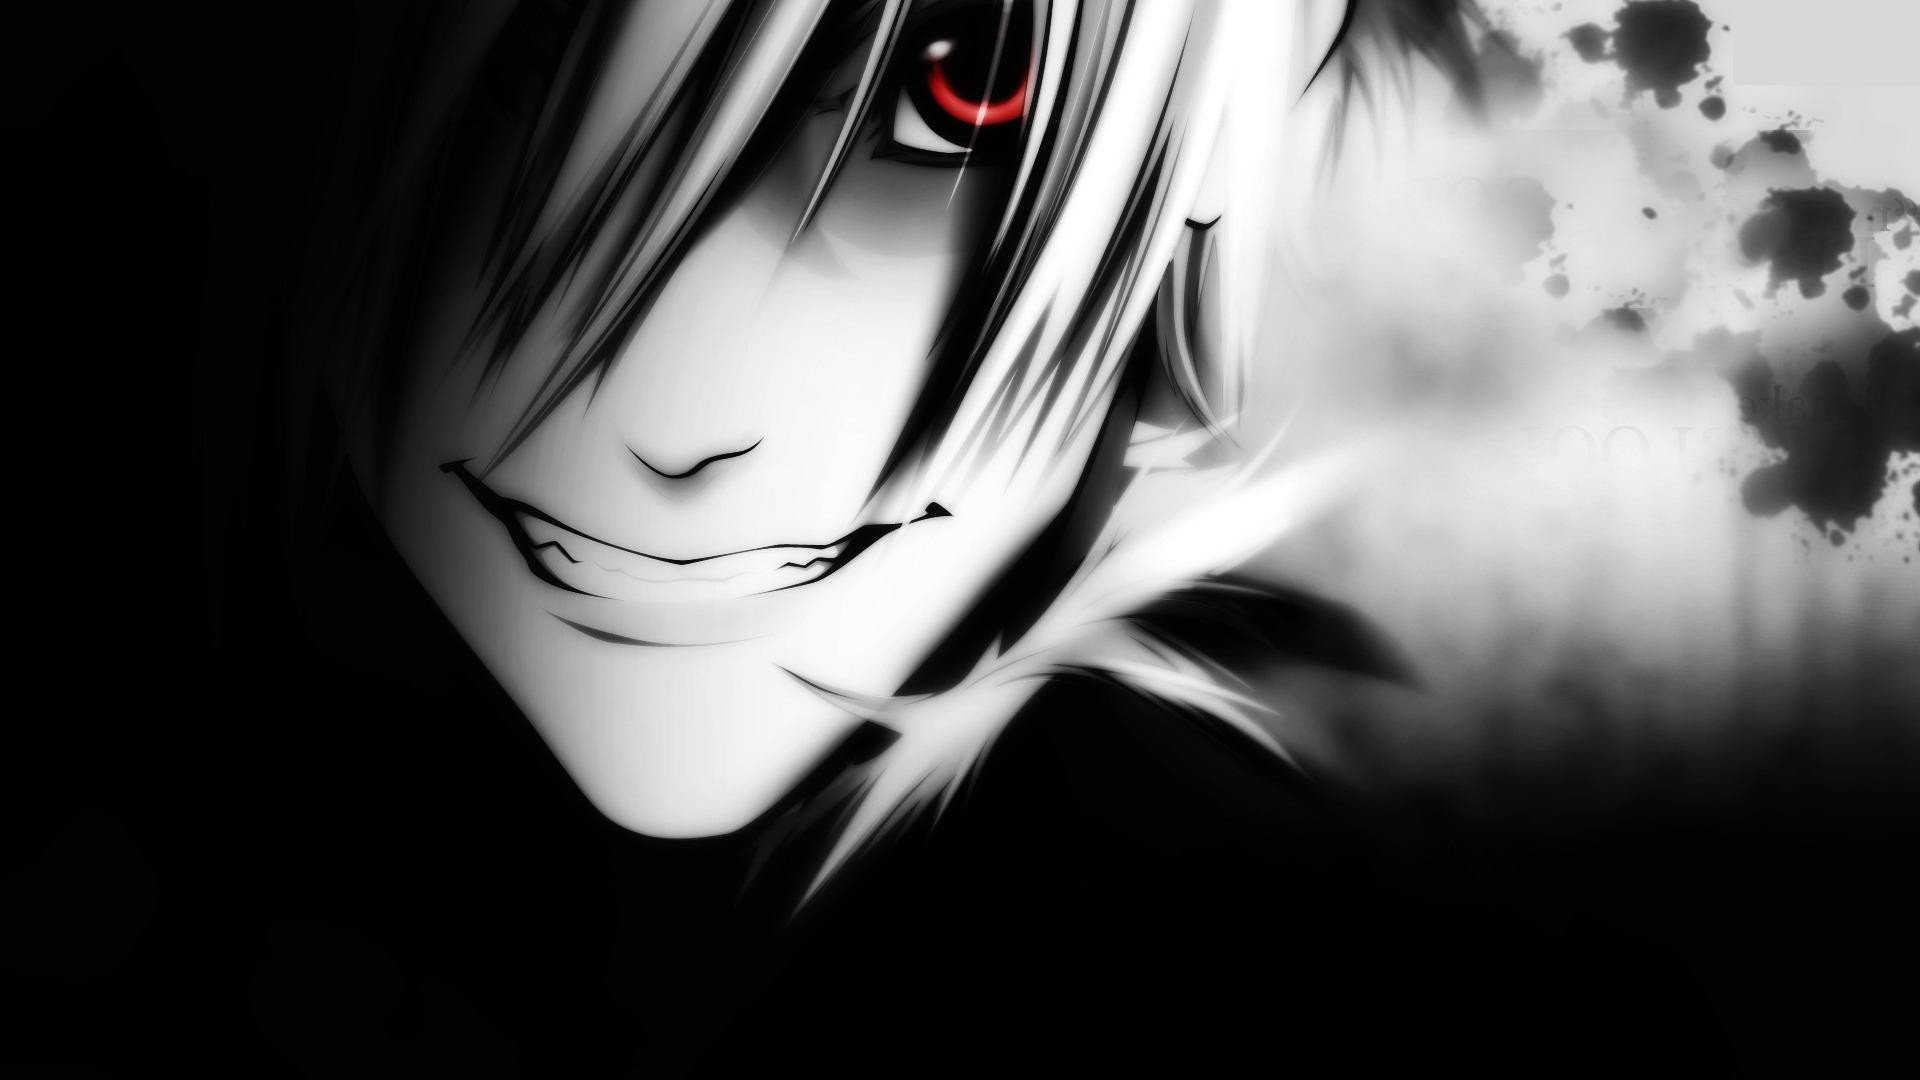 Cool Black And White Anime Wallpapers